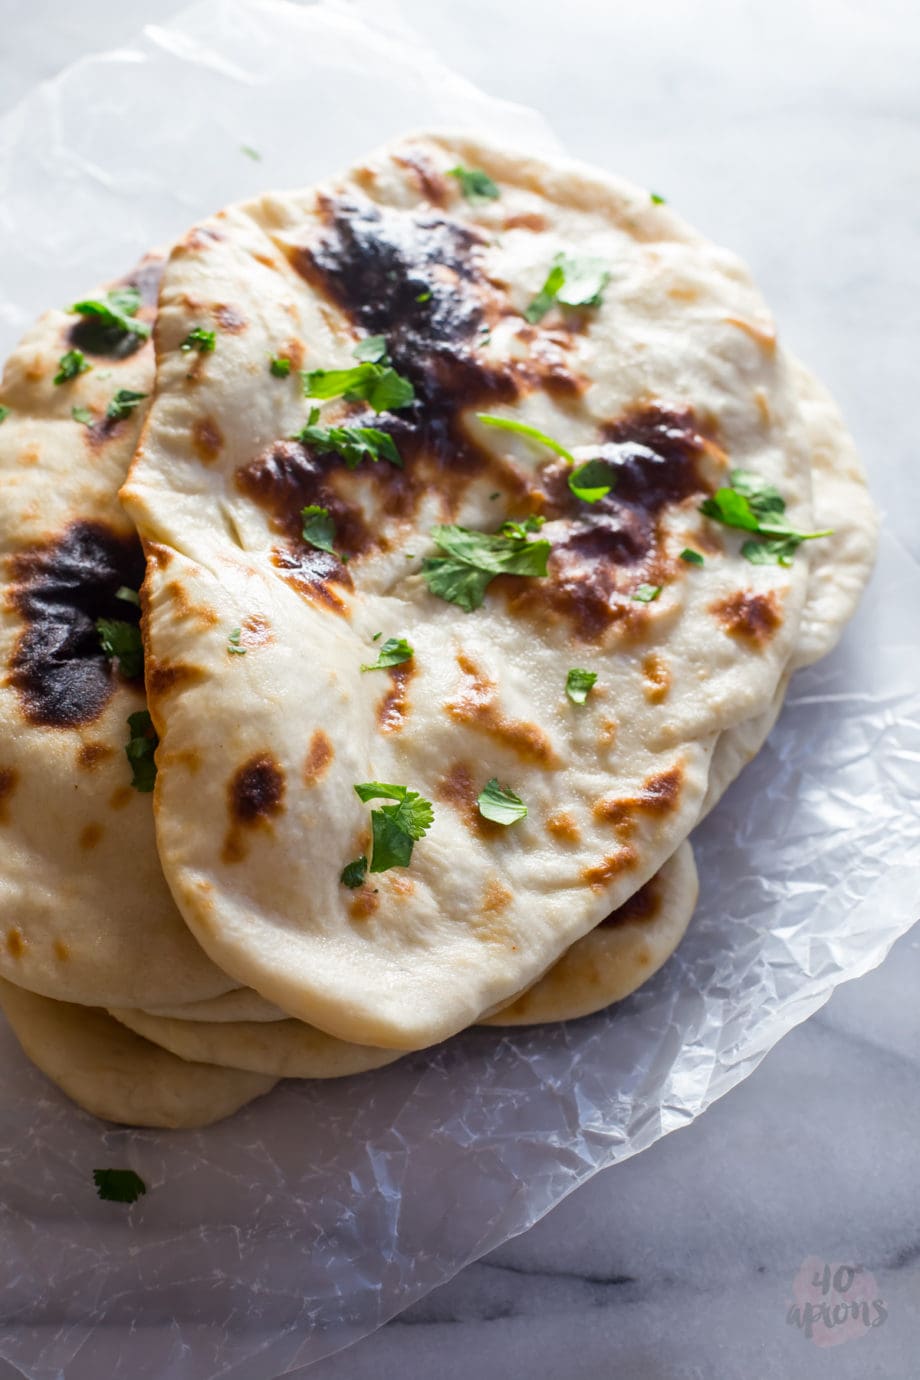 Perfect naan. Chewy, tender, perfect with Indian dishes. // 40 Aprons